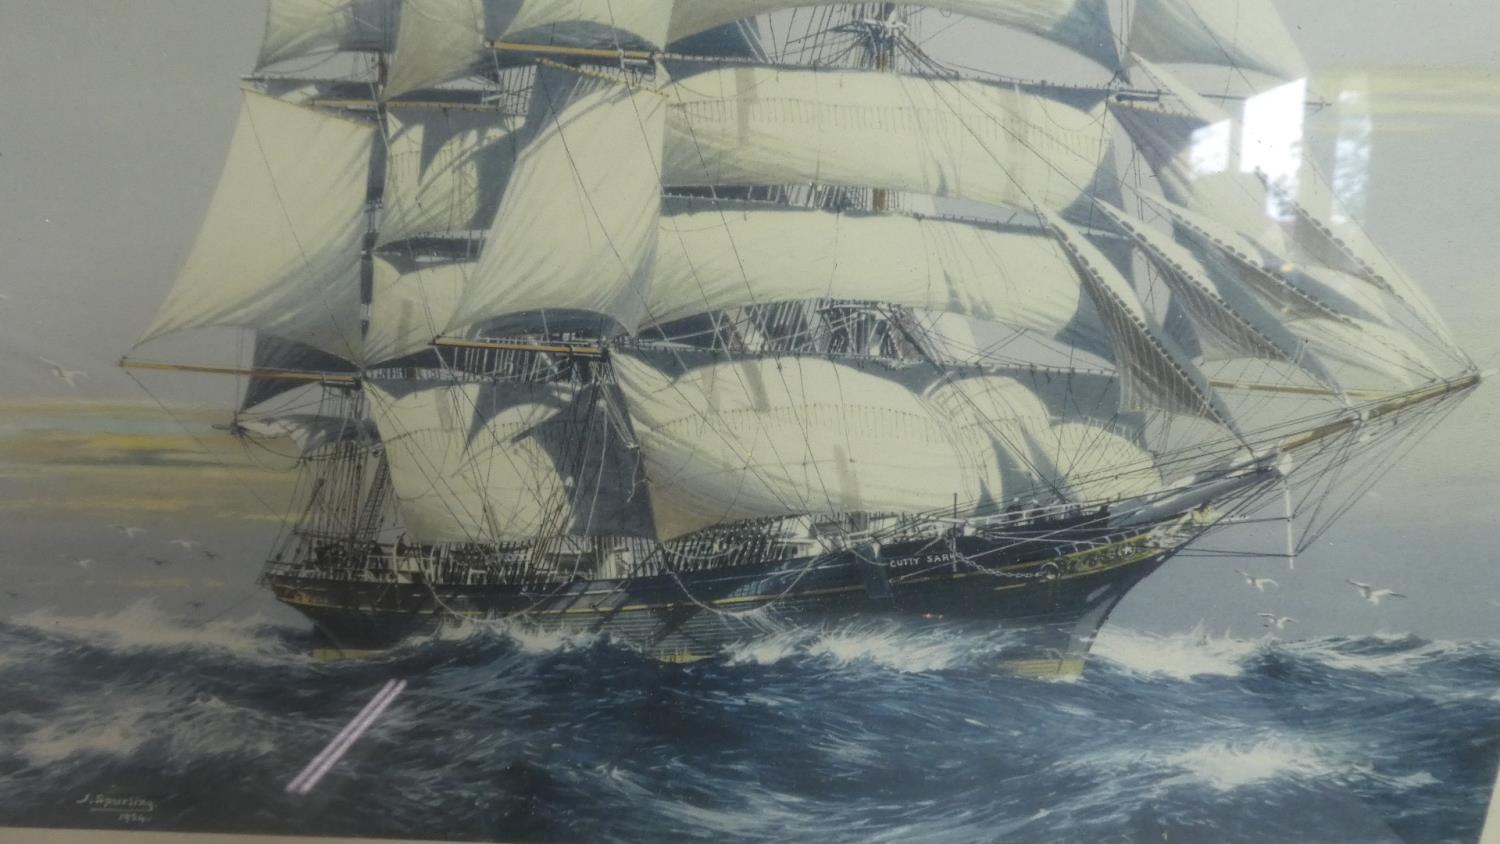 A Set of Three Tall Ship Prints, Flying Cloud, Cutty Sark, Lighting - Image 4 of 7